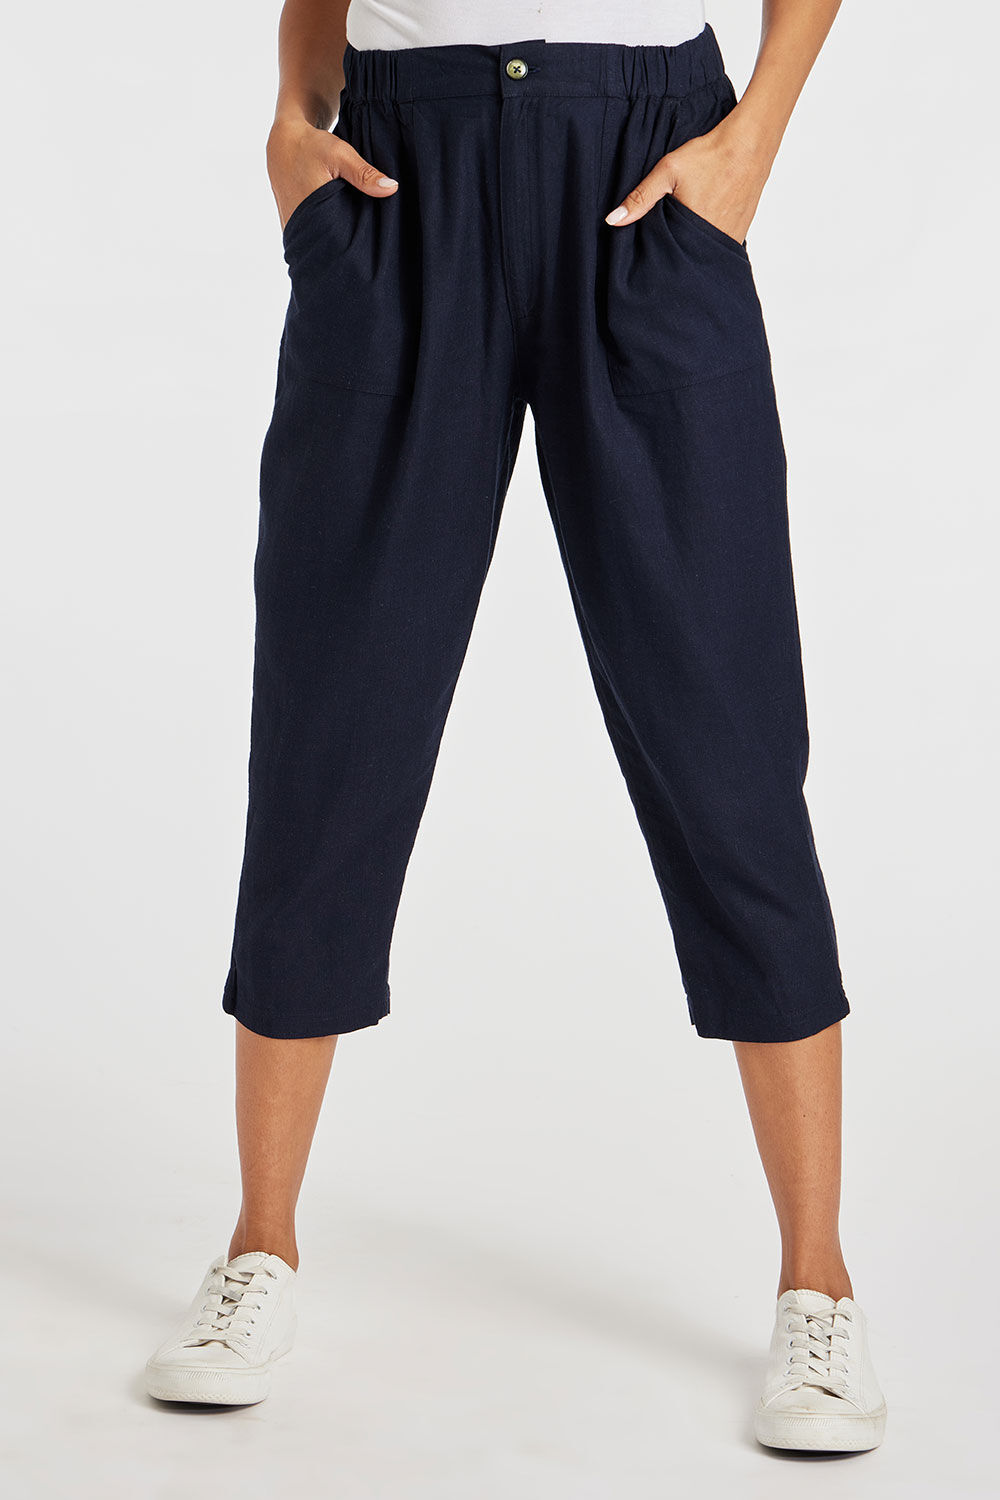 Bonmarche Navy Tapered Cropped Linen Trousers With Button Detail, Size: 18